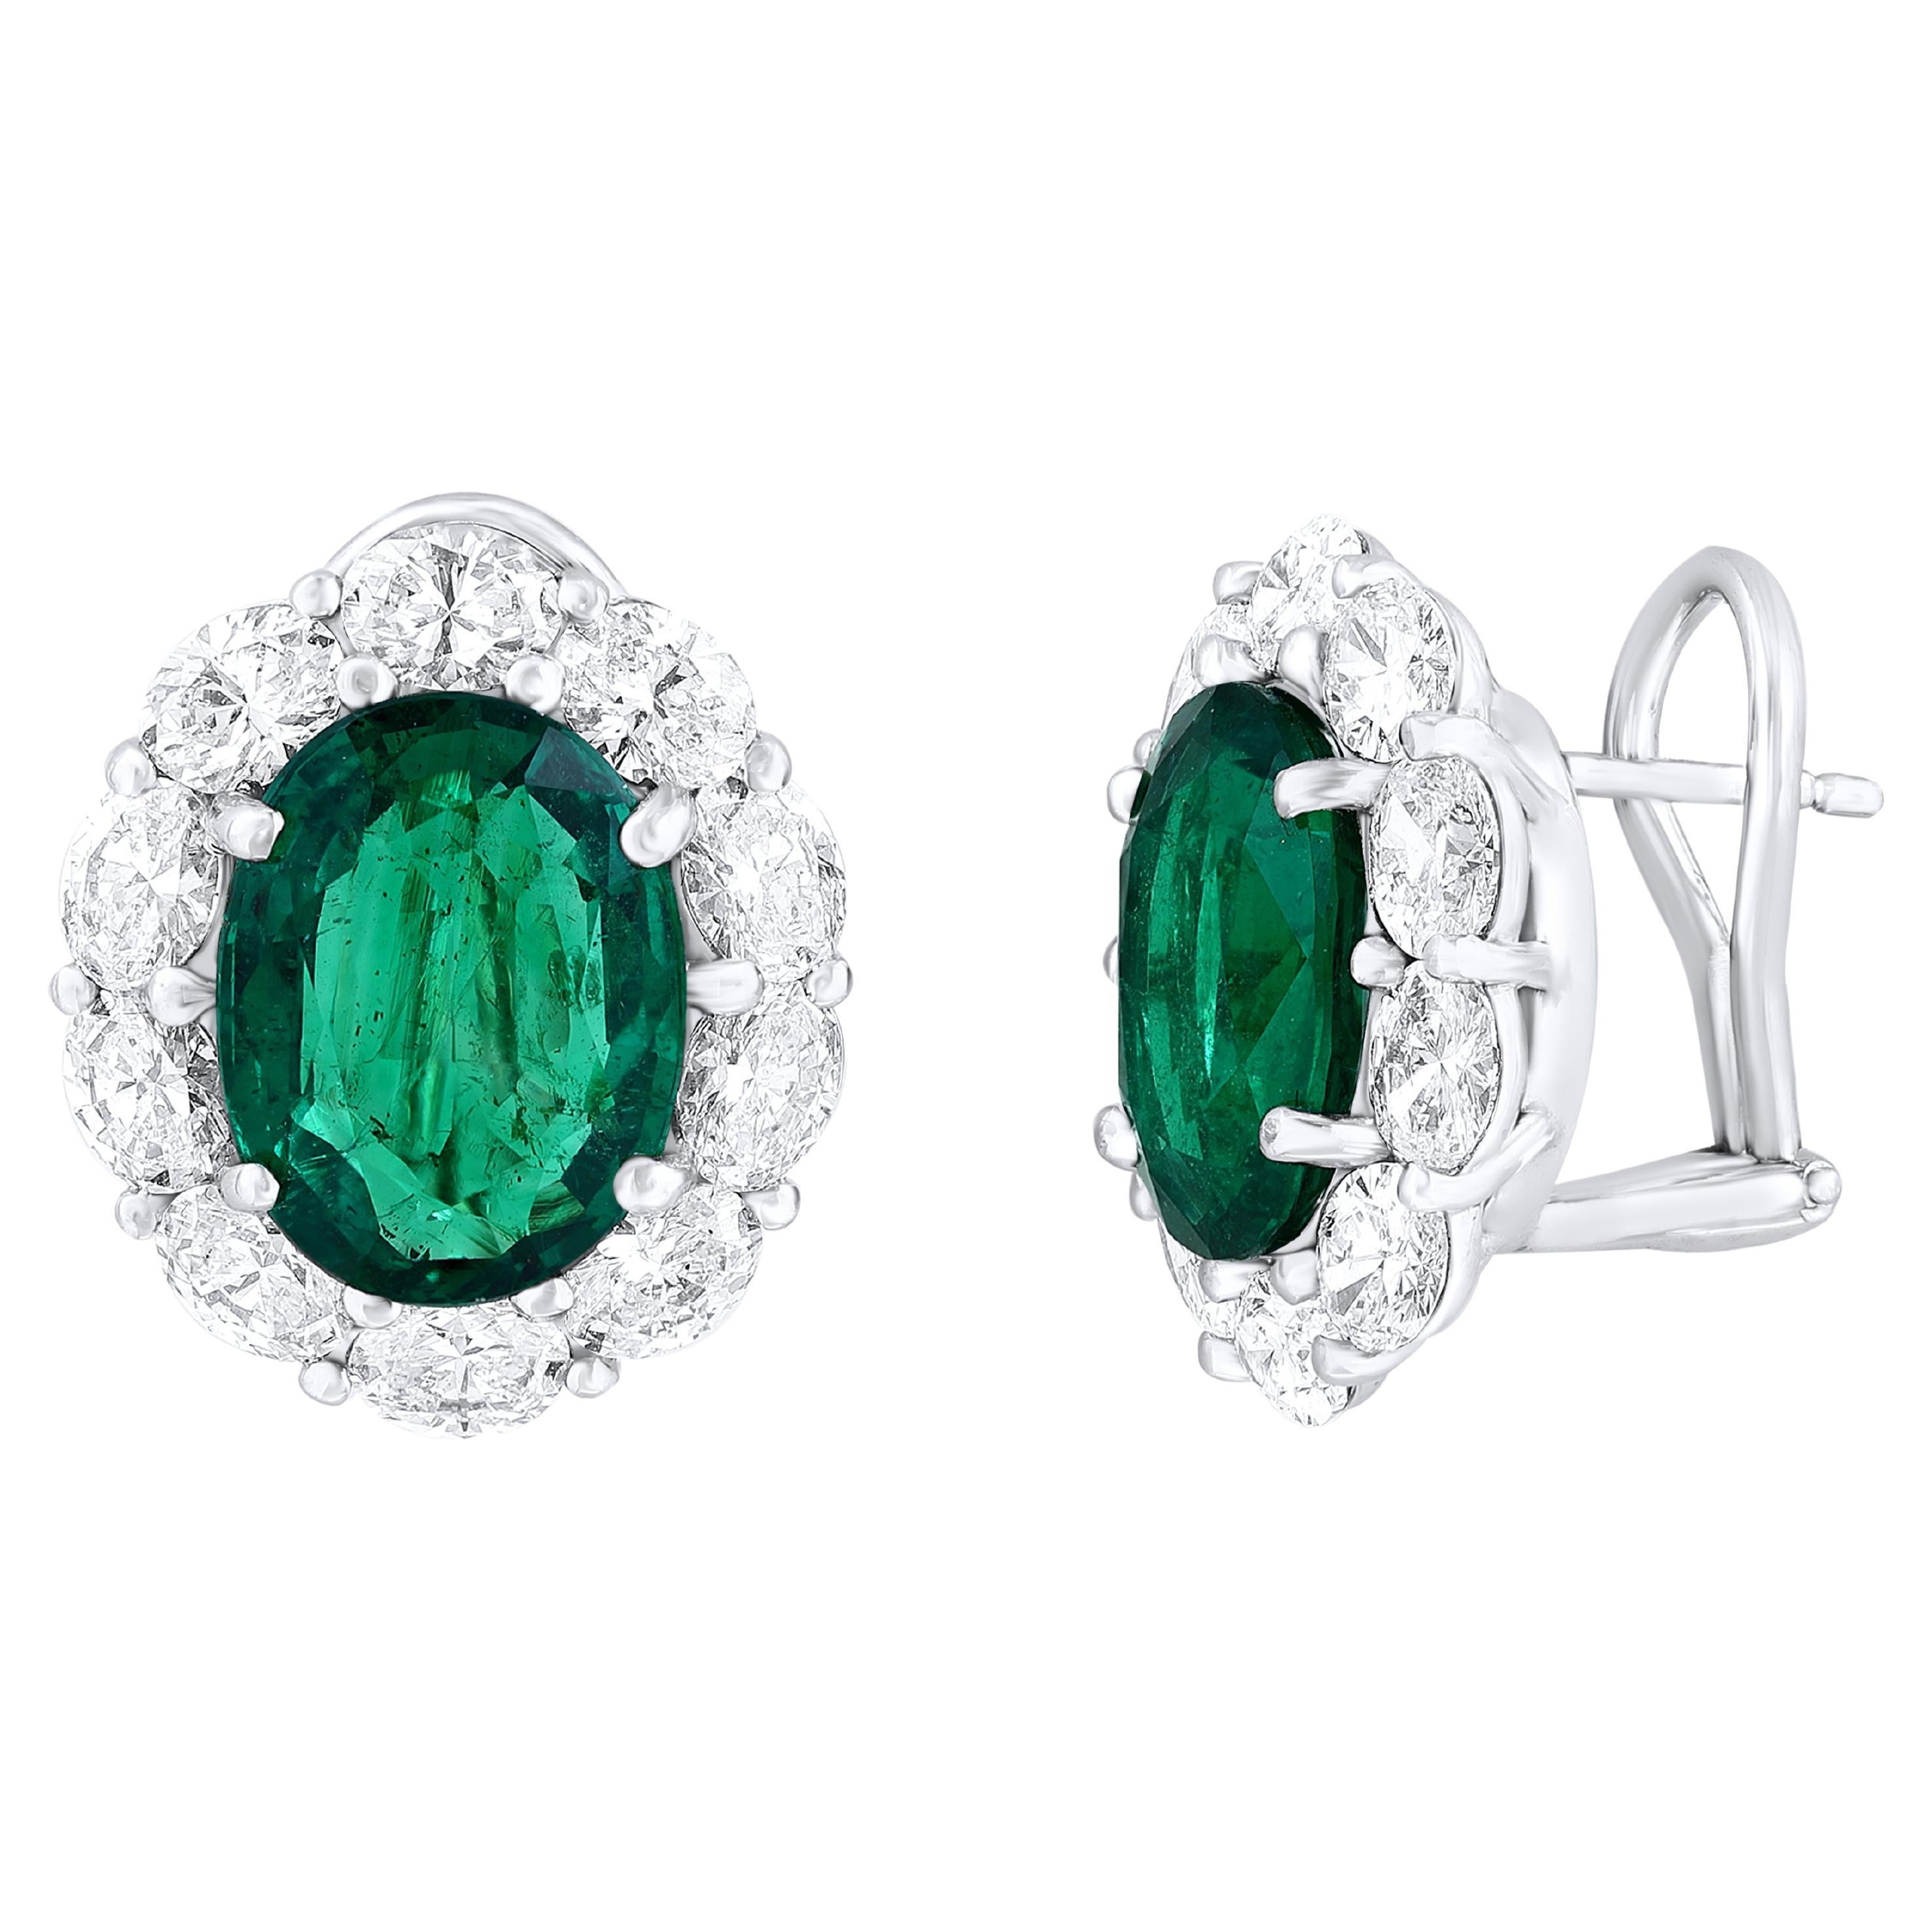 Certified 9.70 Carat Oval Cut Emerald and Diamond Halo Earrings in 18K WhiteGold For Sale